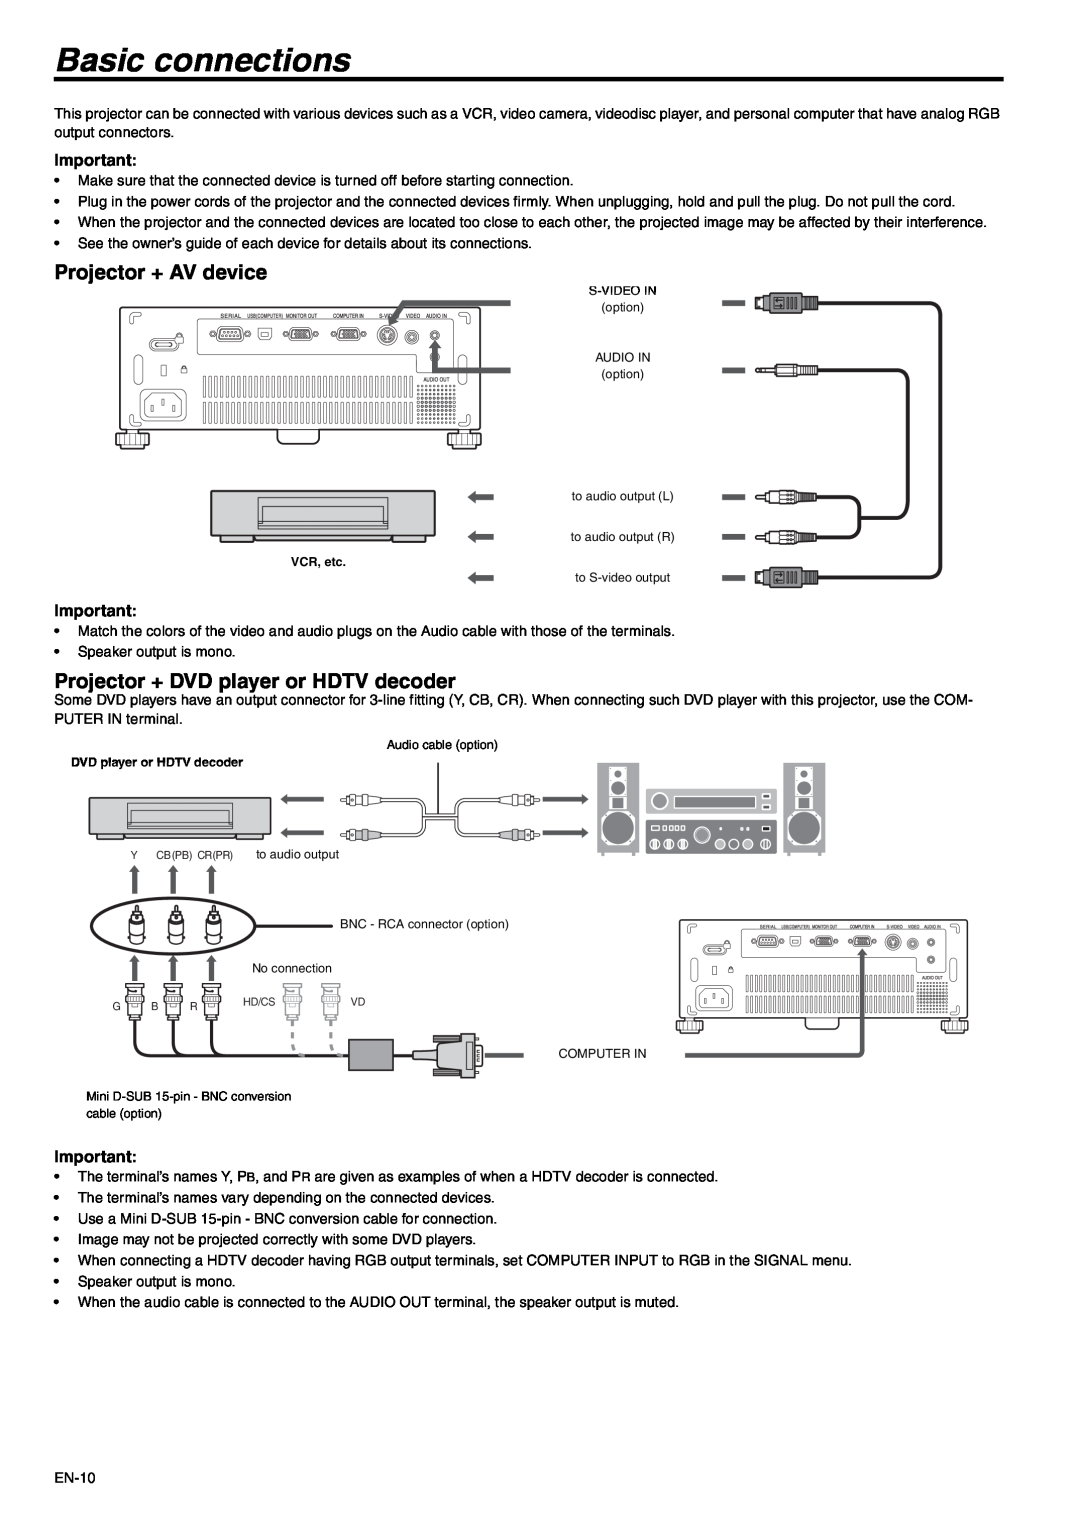 Mitsubishi Electronics SD105U user manual Basic connections, Projector + AV device, Projector + DVD player or HDTV decoder 